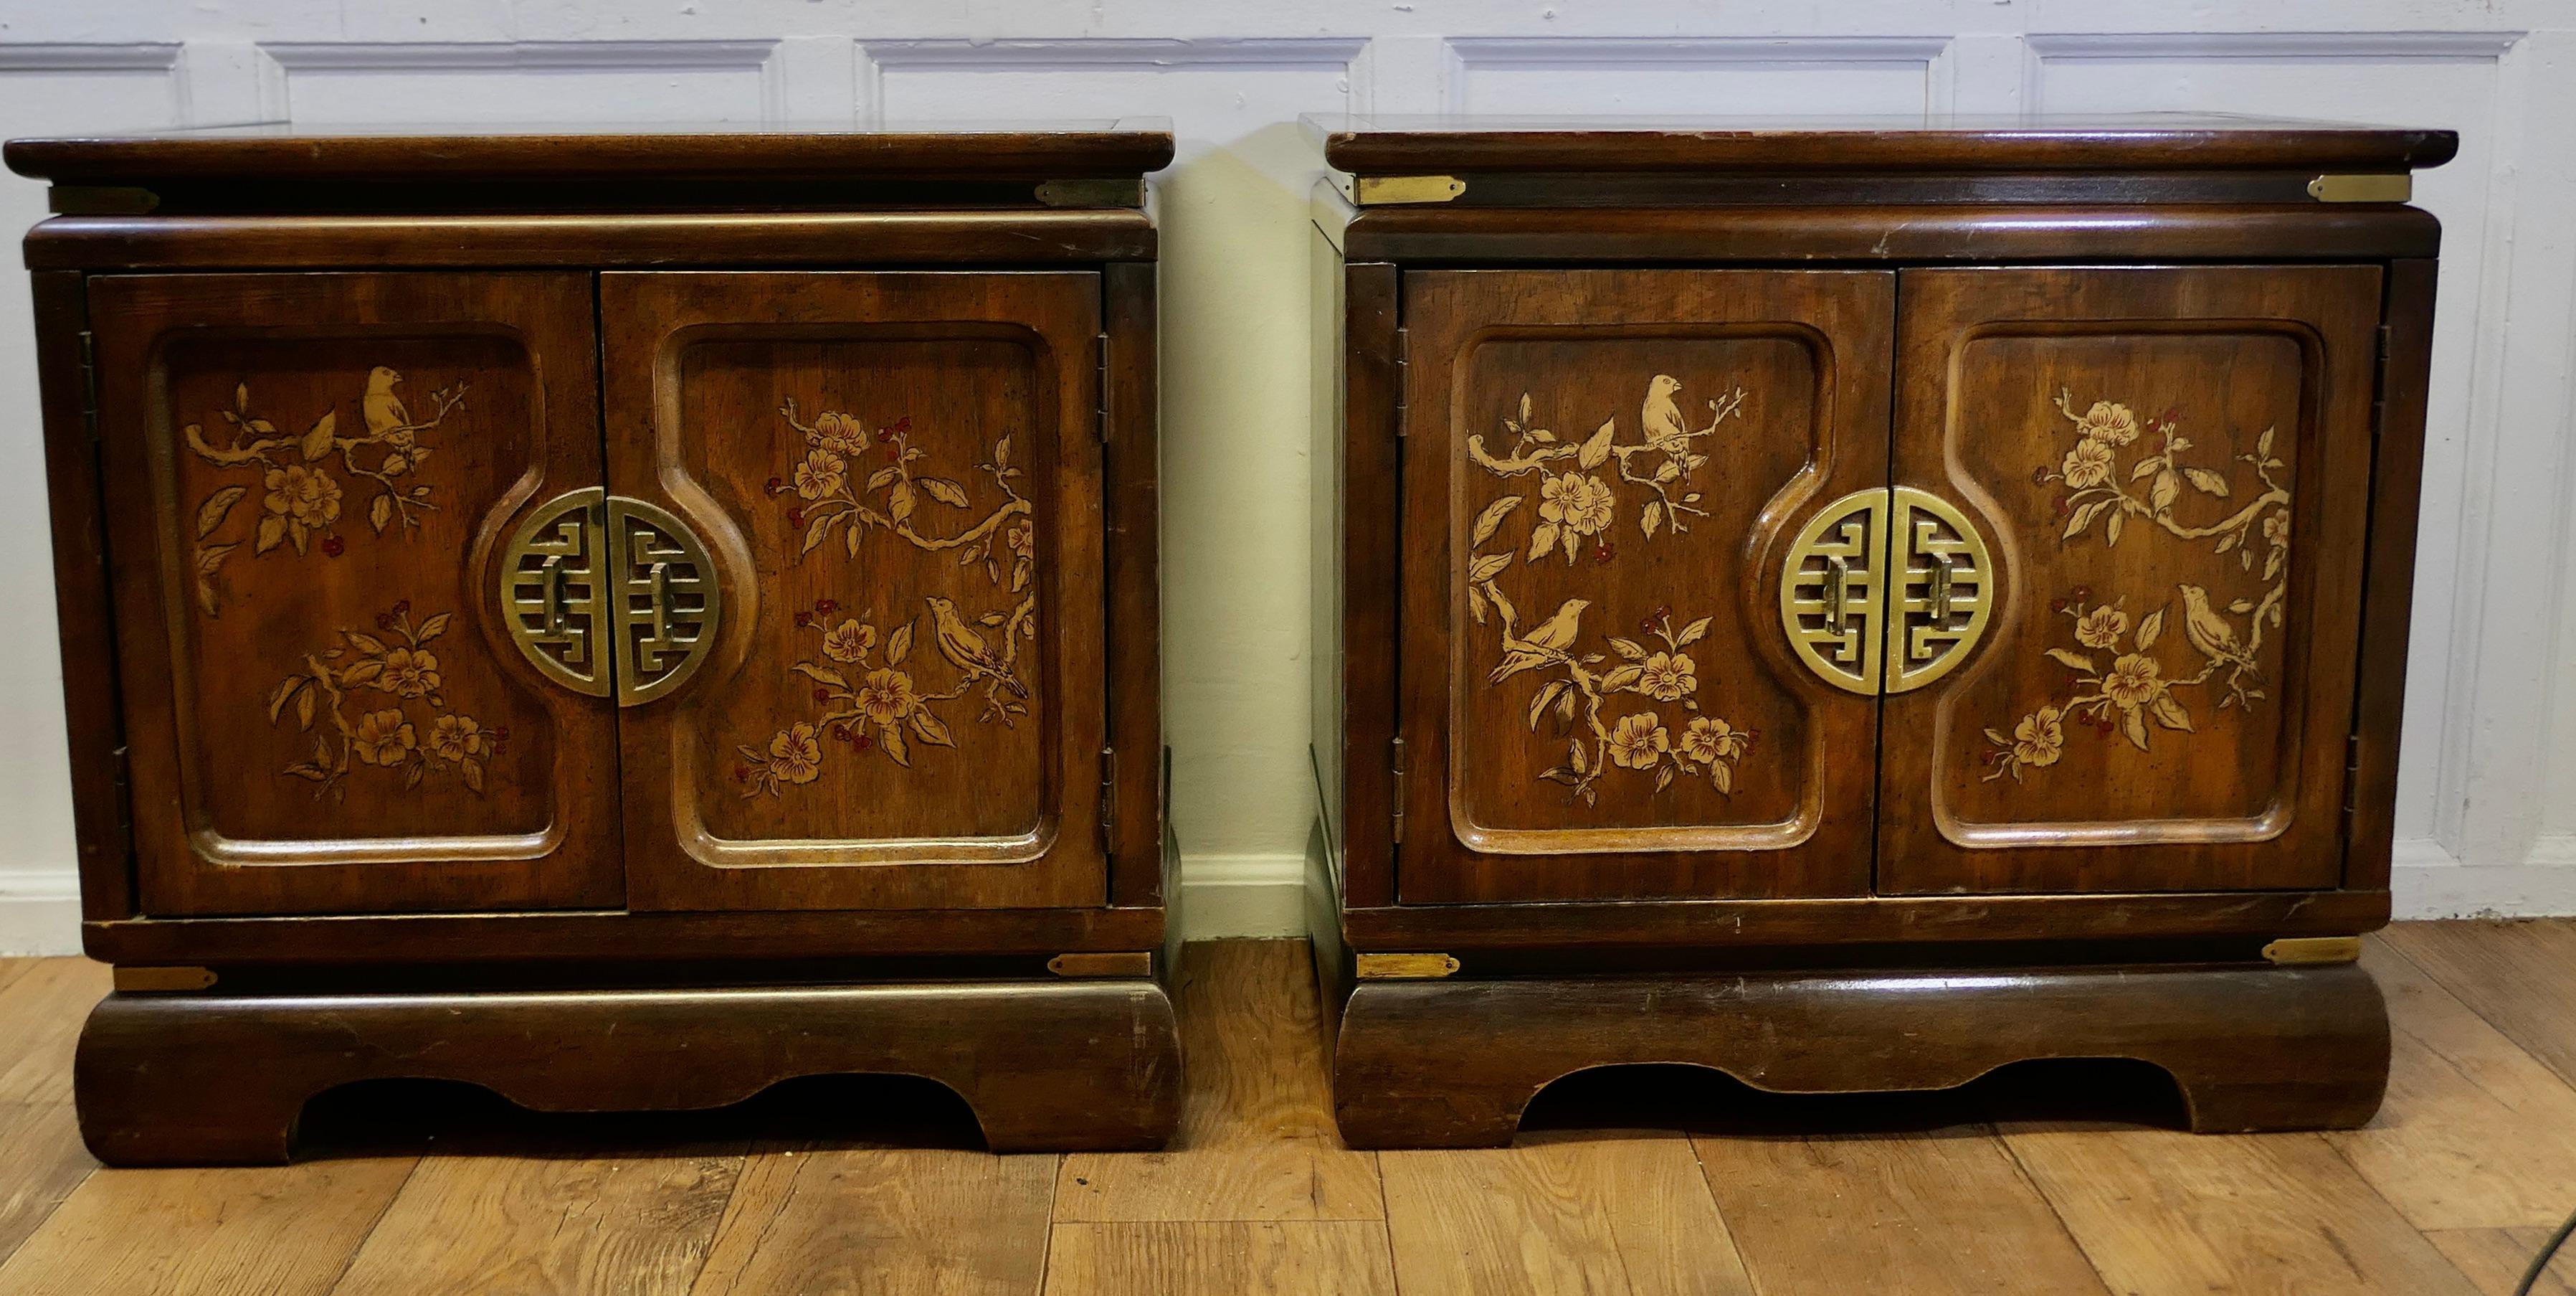 A Superb Pair of Chinoiserie Decorated Side Cabinets. 

A Prime example of chinoiserie decor with traditional Chinese illustrations on the front panelled doors with an elaborate Pin Lock on the front
Inside, they each have a shelf, both in good